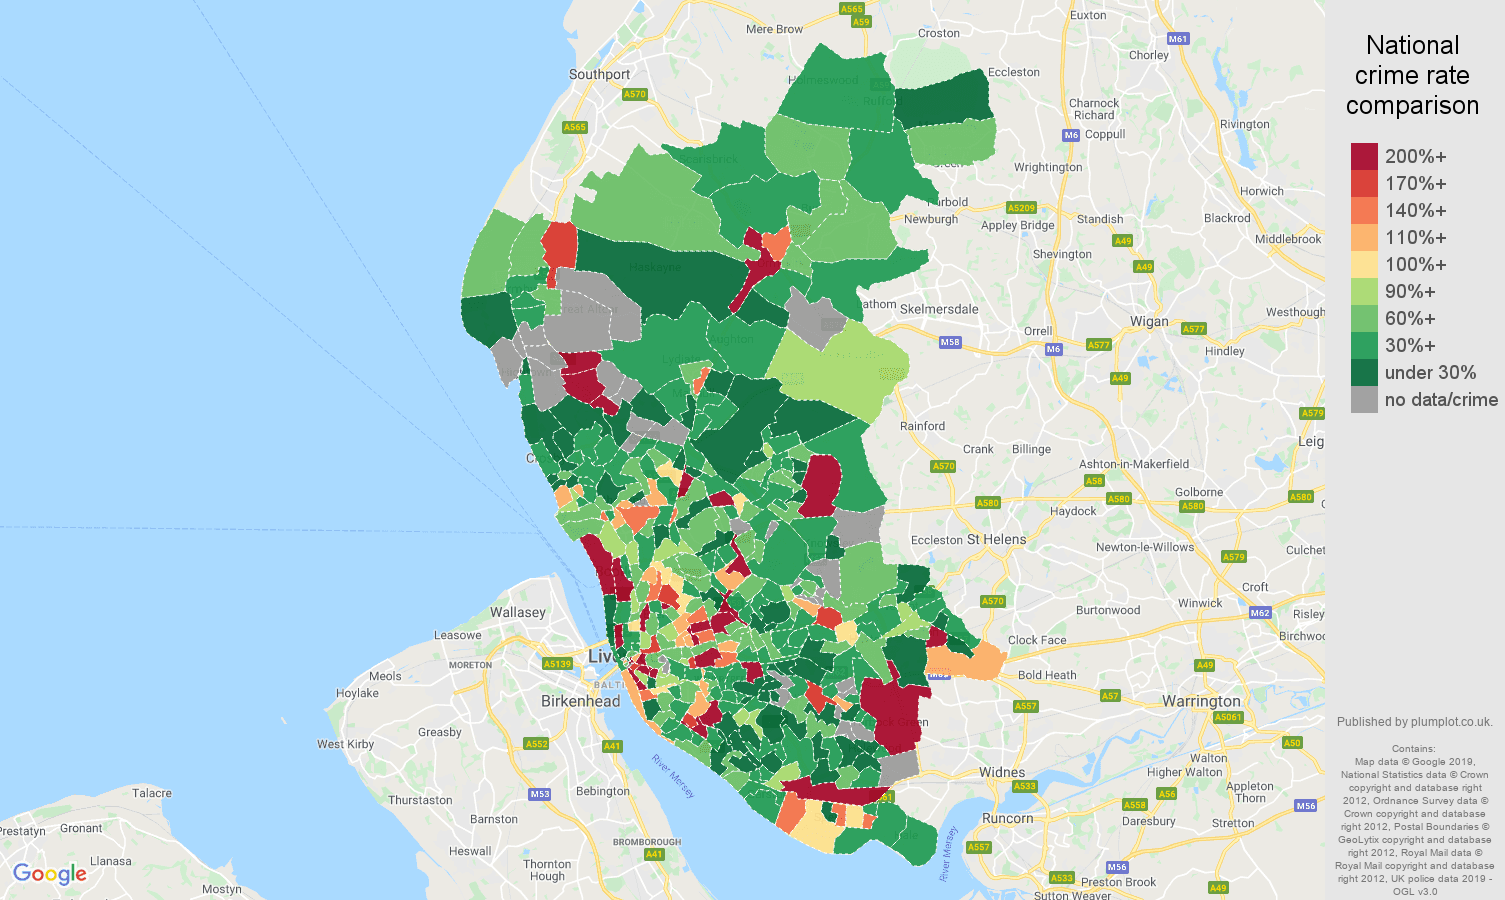 Liverpool other theft crime rate comparison map